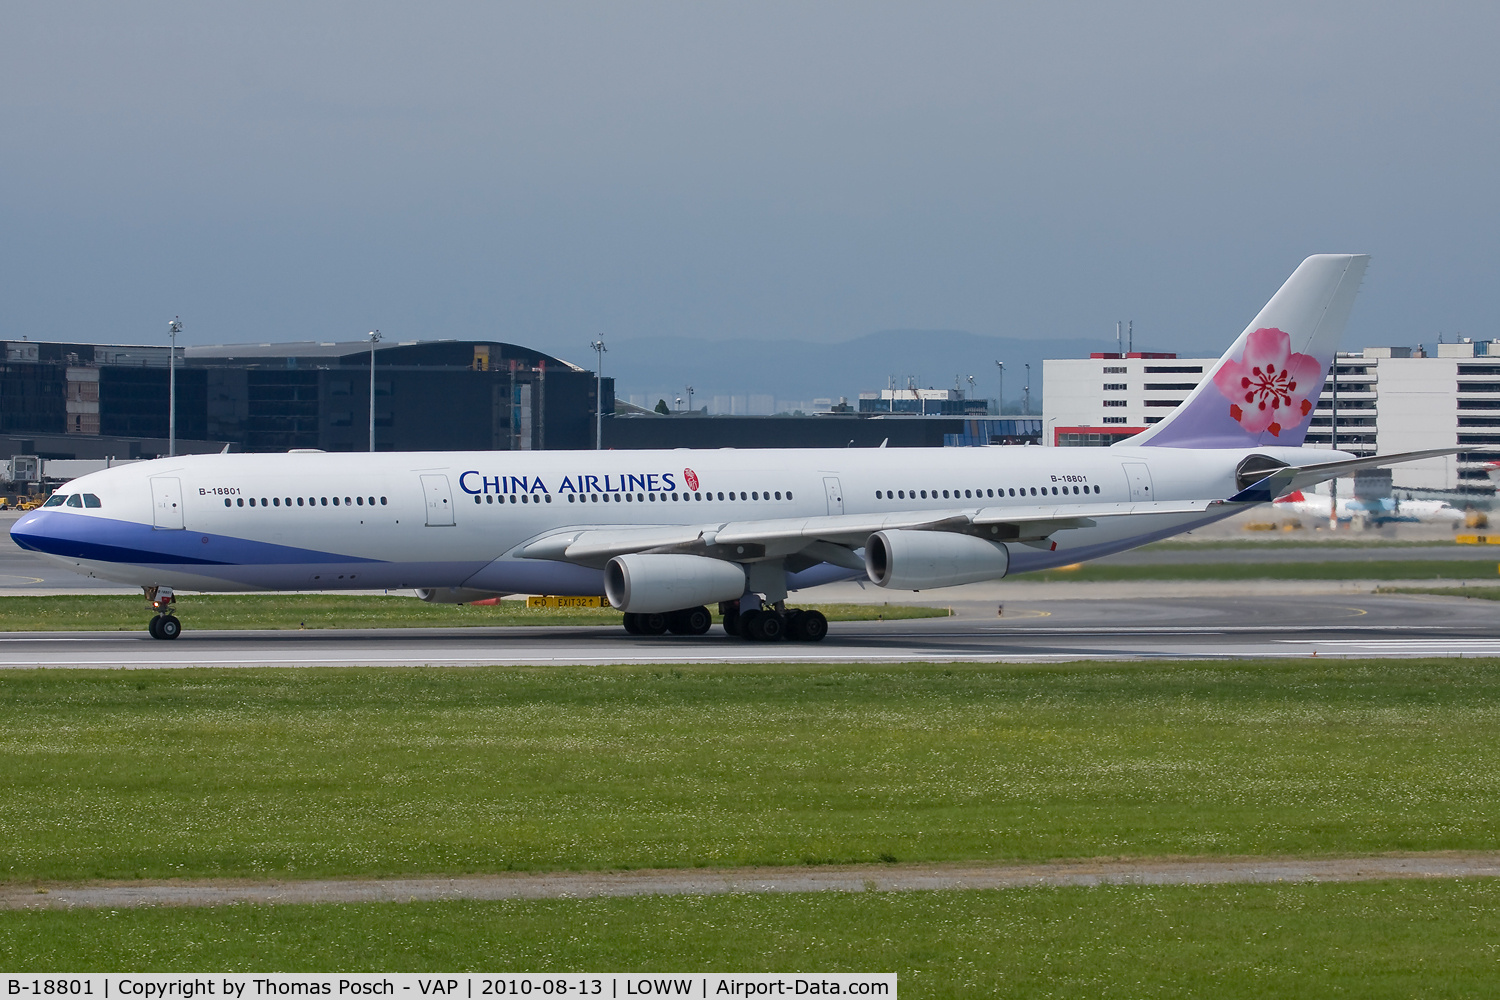 B-18801, 2001 Airbus A340-313 C/N 402, China Airlines